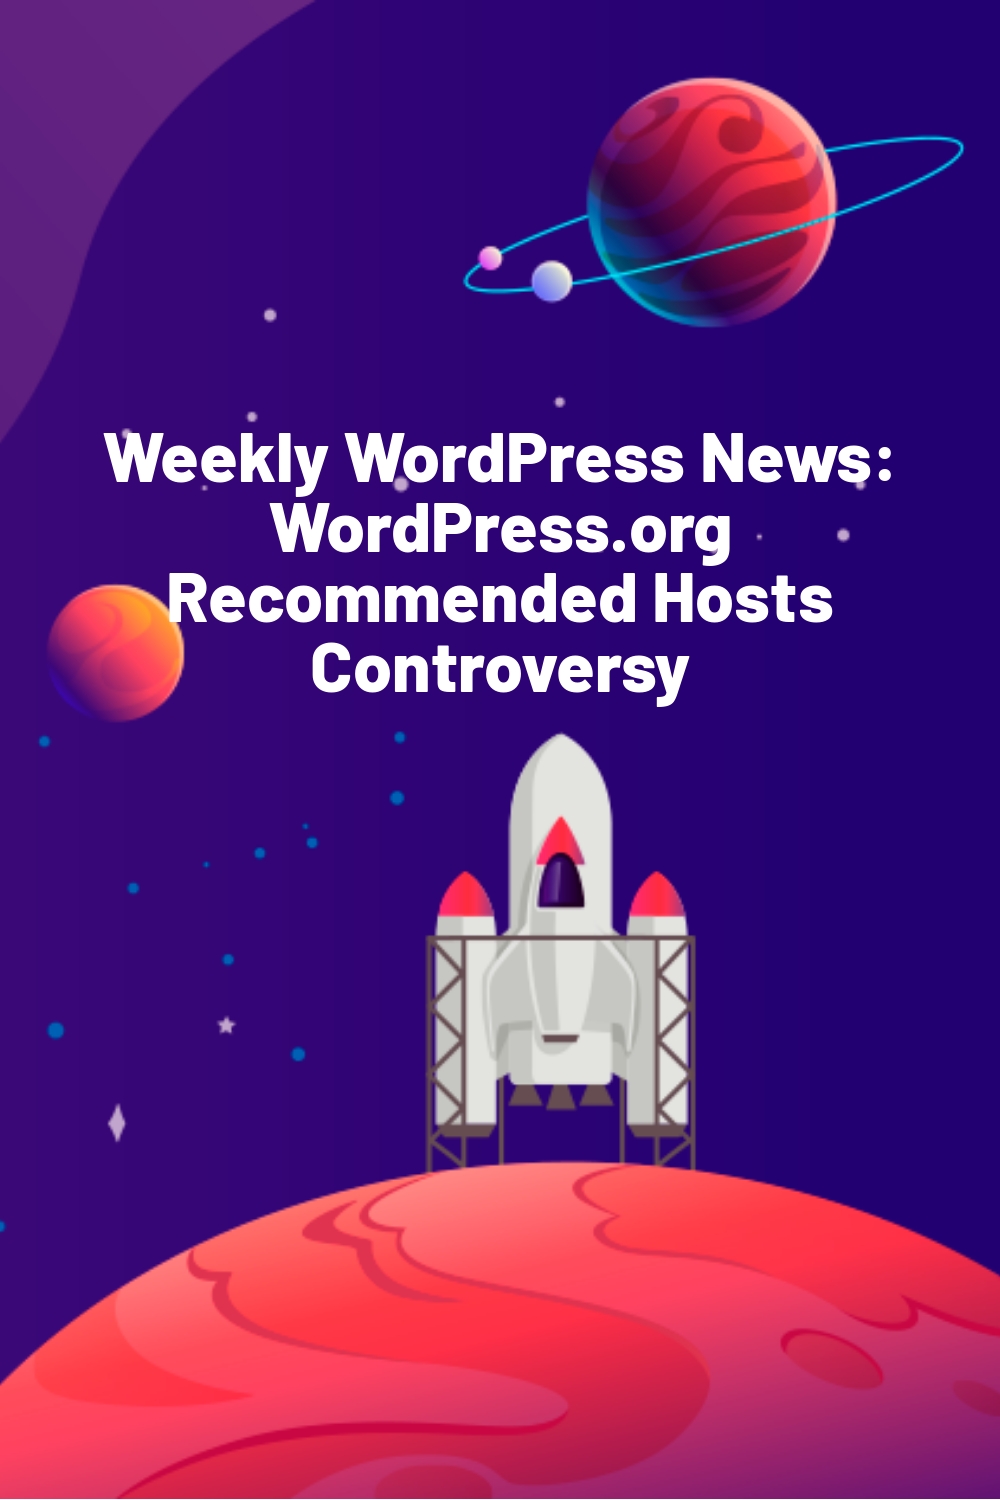 Weekly WordPress News: WordPress.org Recommended Hosts Controversy